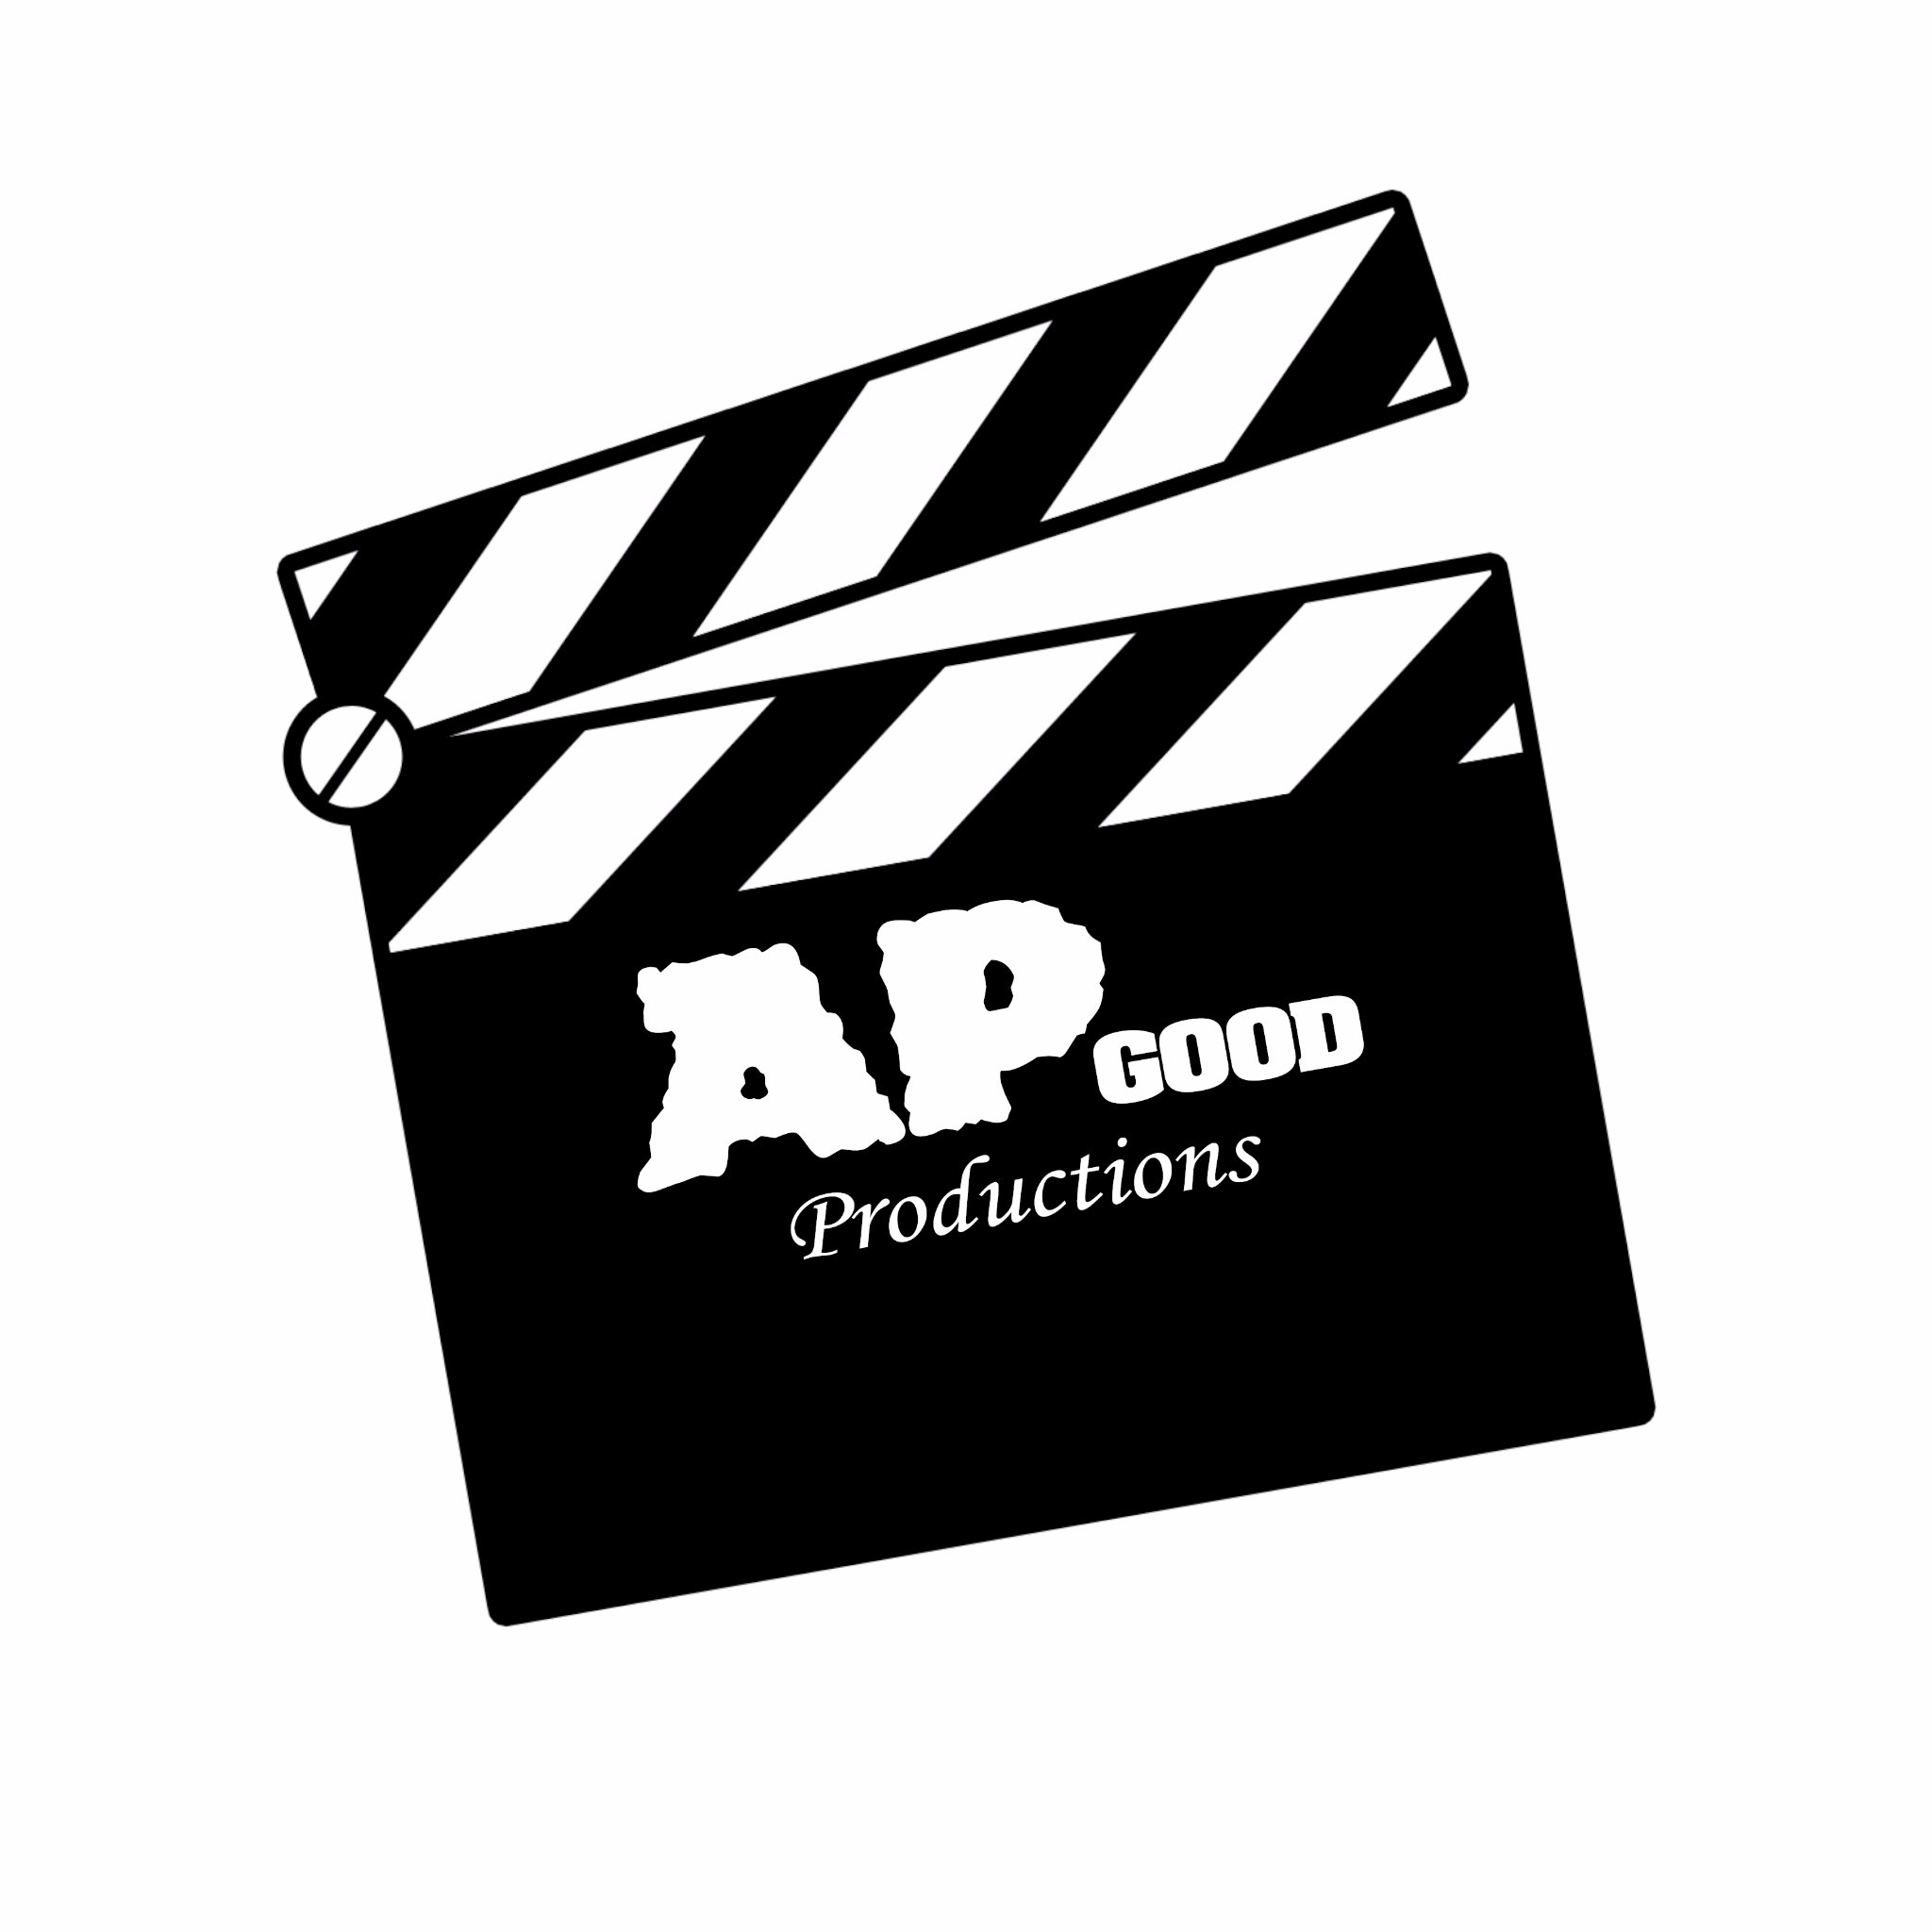 Dedicated to promoting and distributing indie films, projects, and series. Contact: apgoodproductions@gmail.com